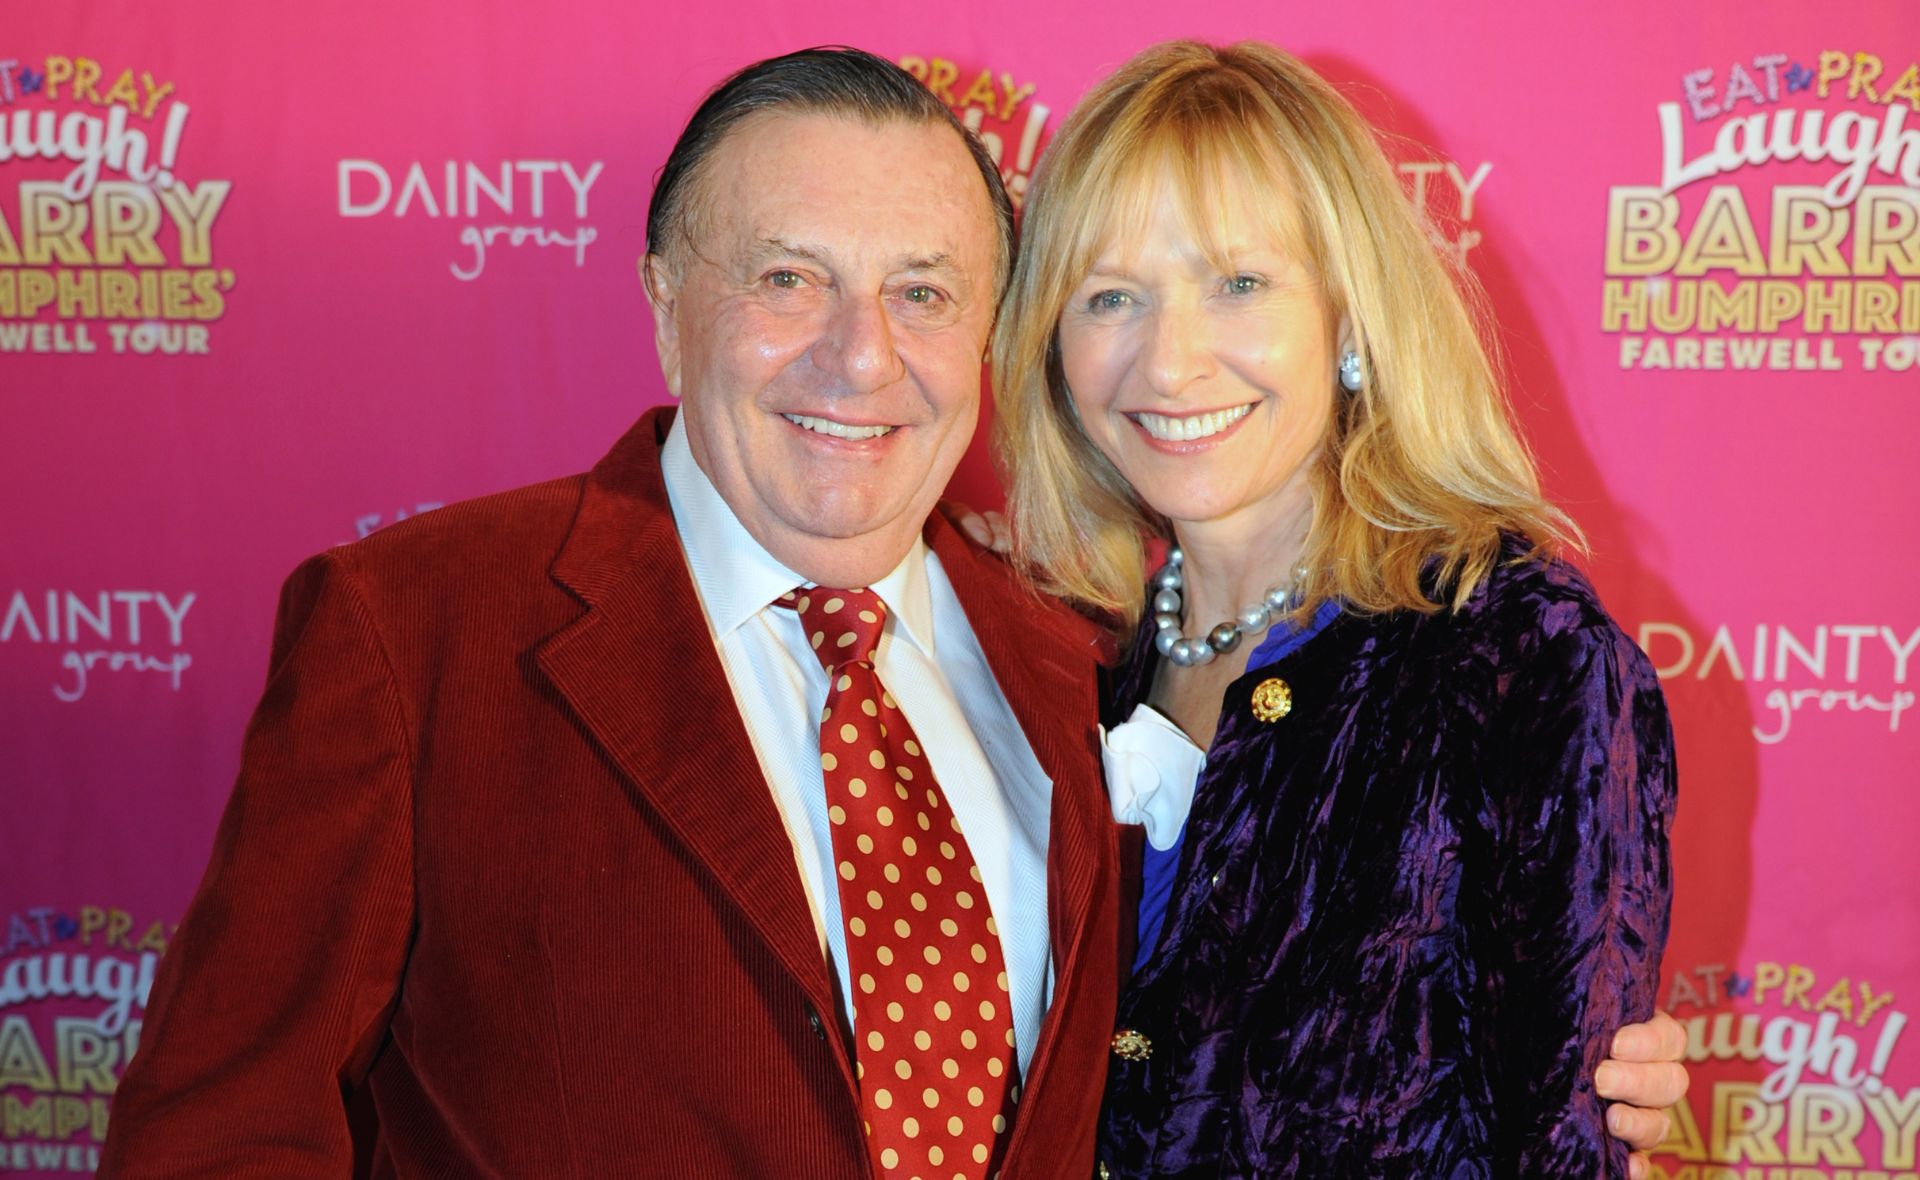 Barry Humphries memorial service has caused divide among his friends and family